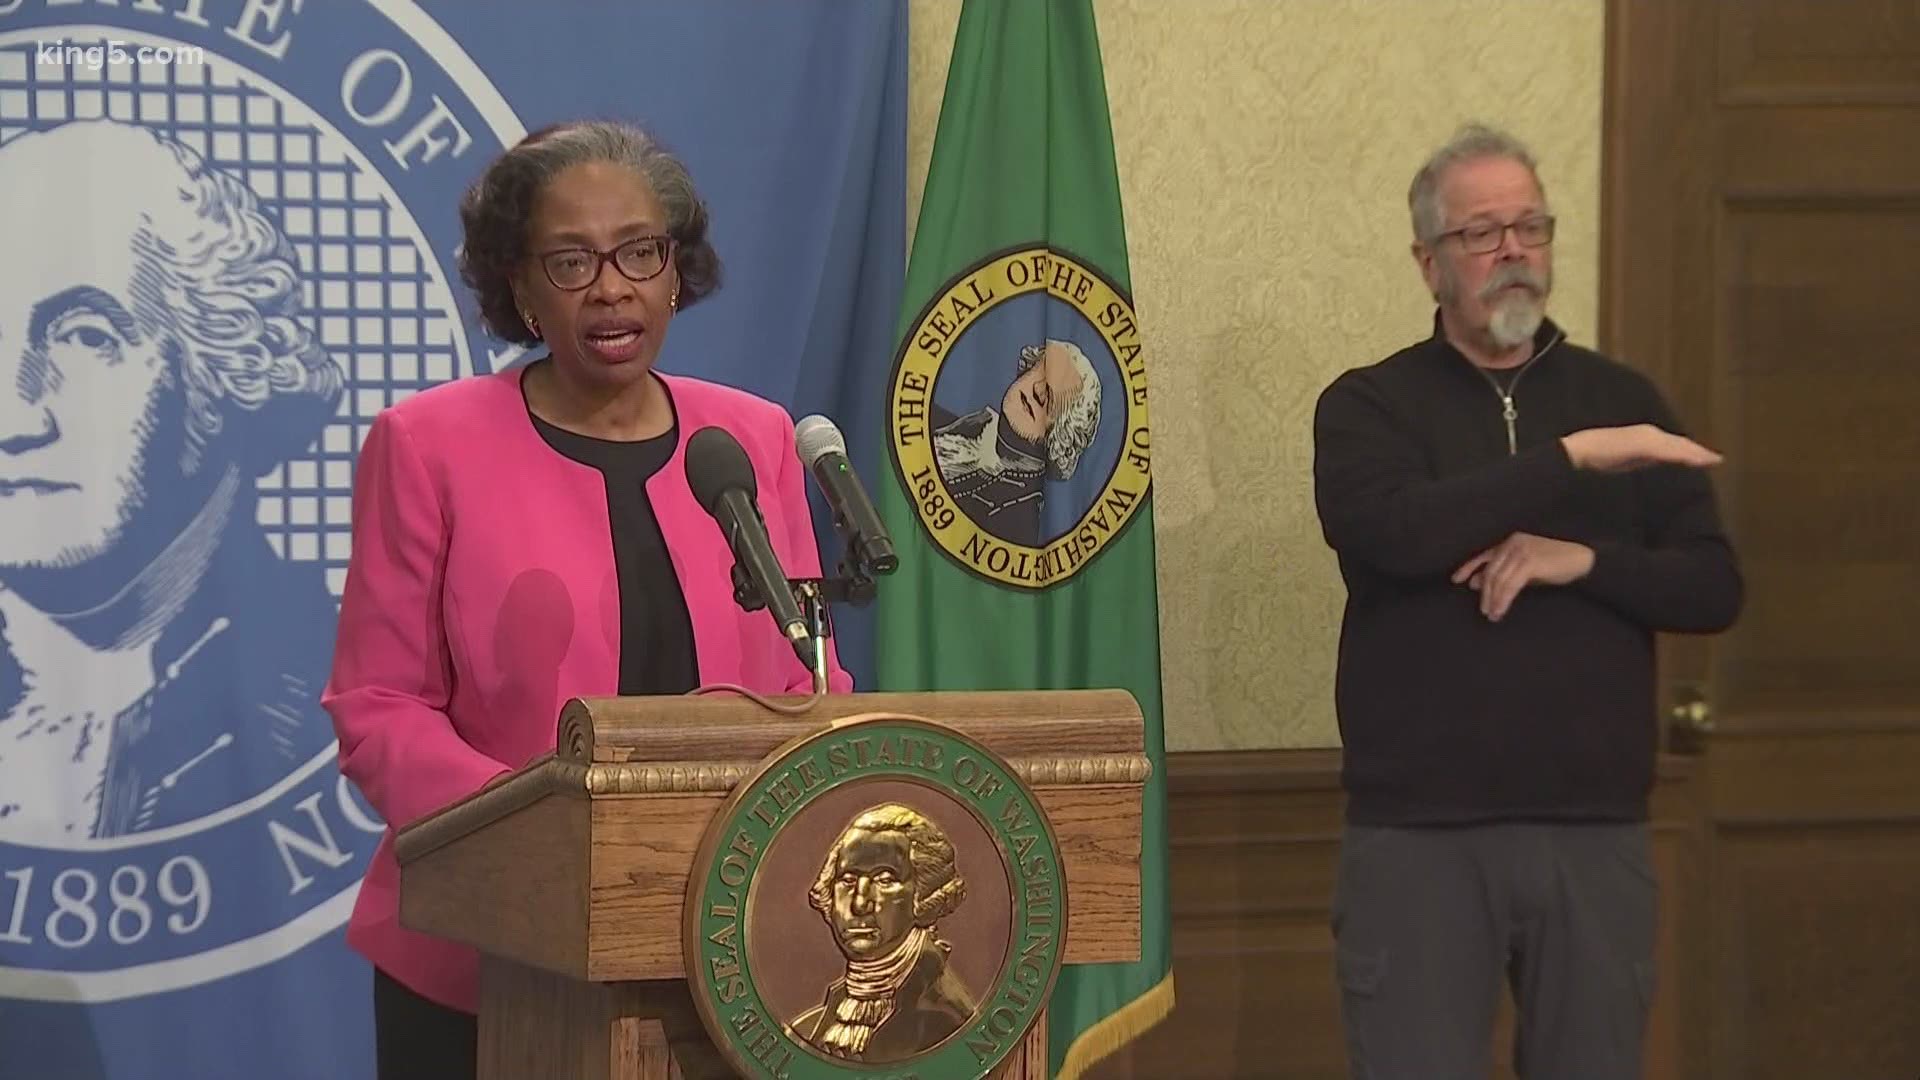 Gov. Jay Inslee announced Judge G. Helen Whitener to the Washington State Supreme Court on Monday. She replaces Justice Charles Wiggins, who retired.